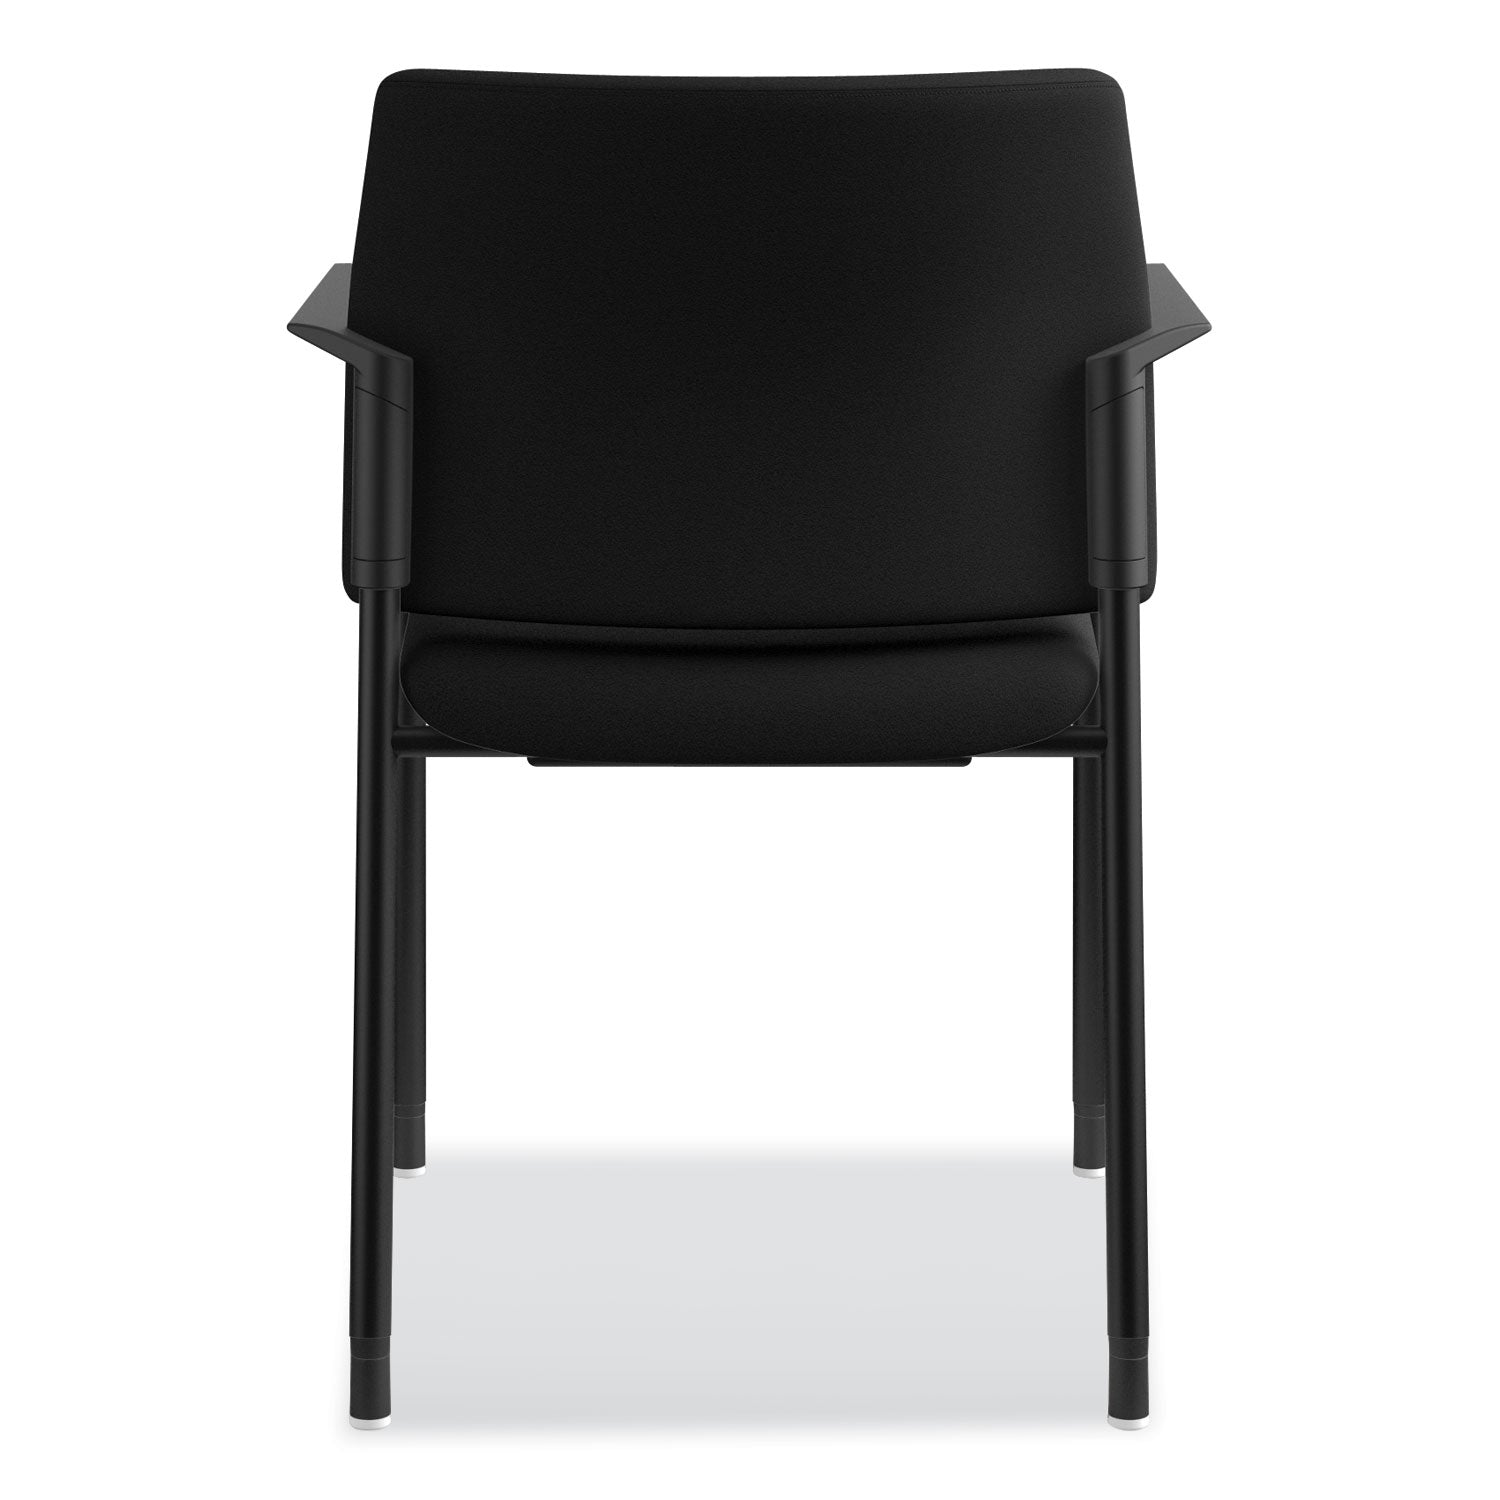 accommodate-series-guest-chair-with-arms-fabric-upholstery-2325-x-2225-x-32-black-seat-back-charblack-legs-2-carton_honsgs6fbc10c - 7